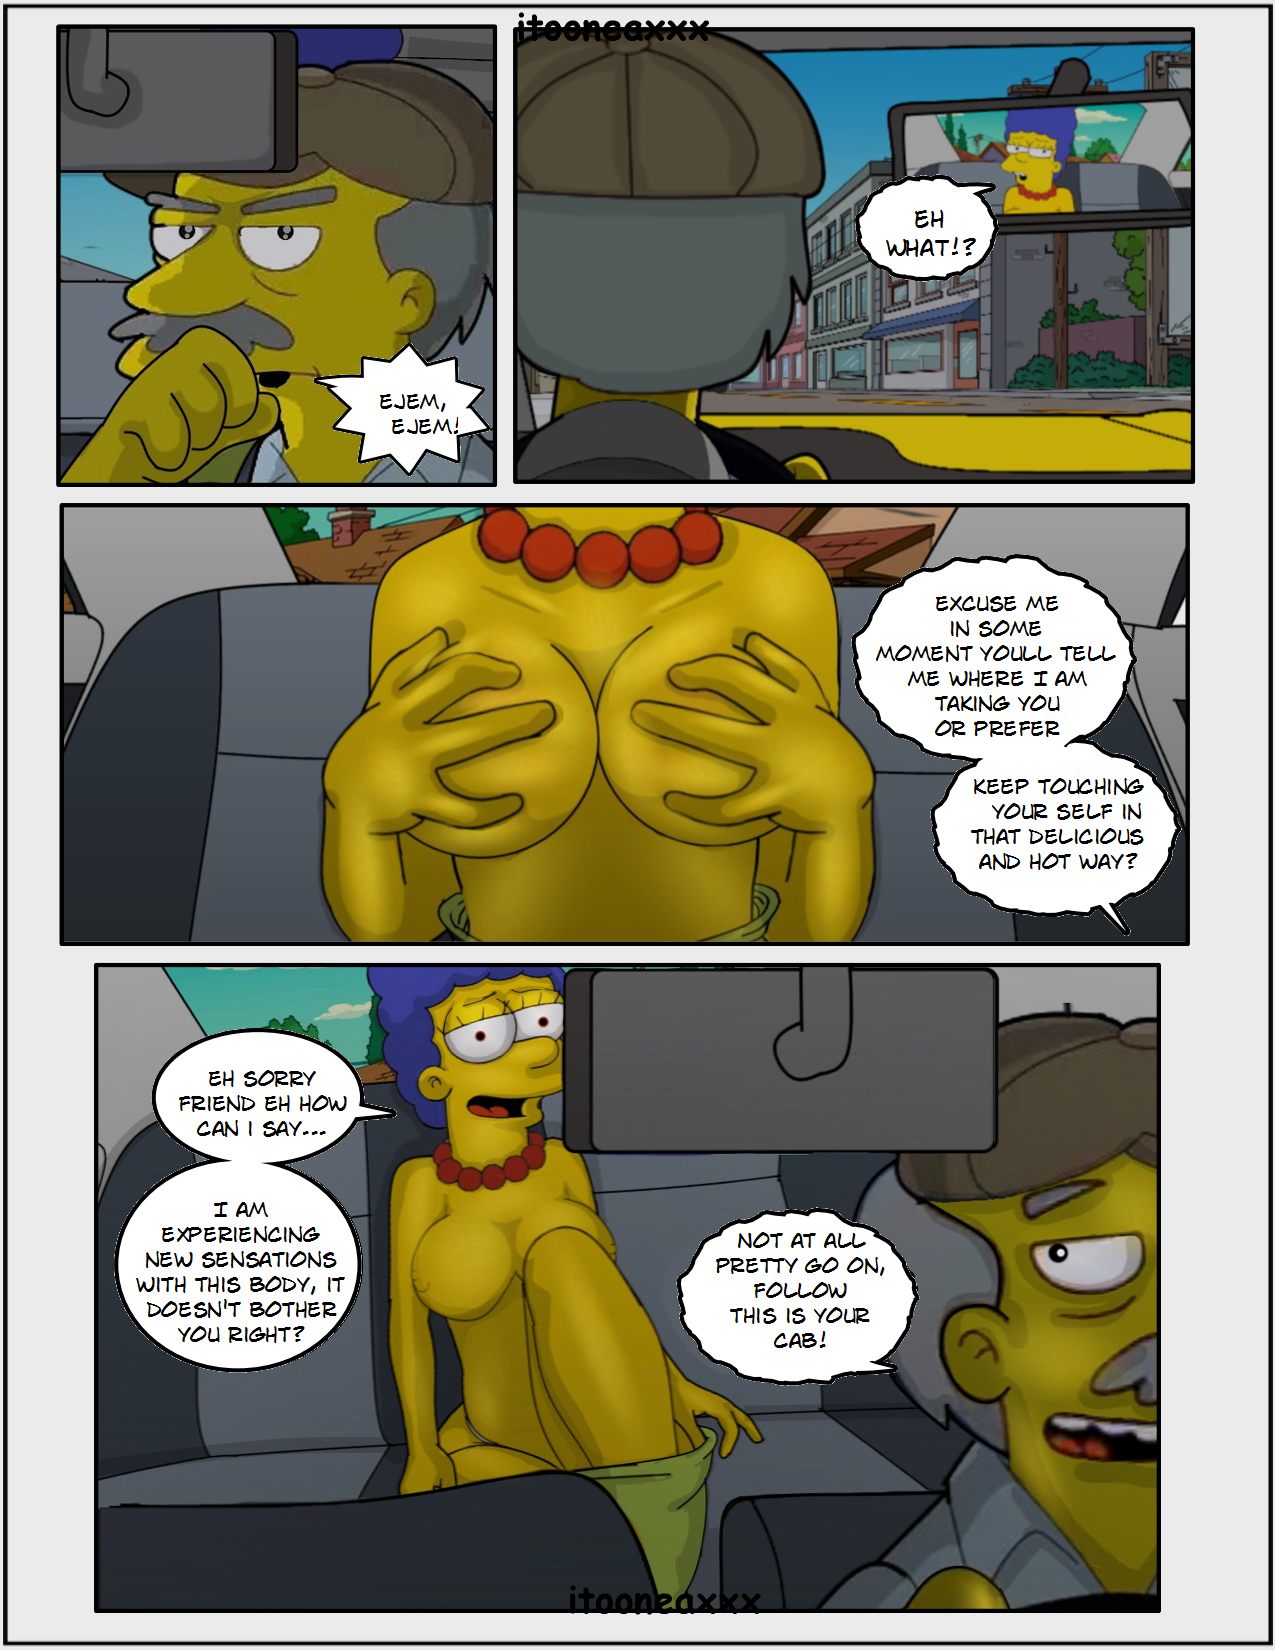 Los Simpsons Ch08 by Itooneaxxx